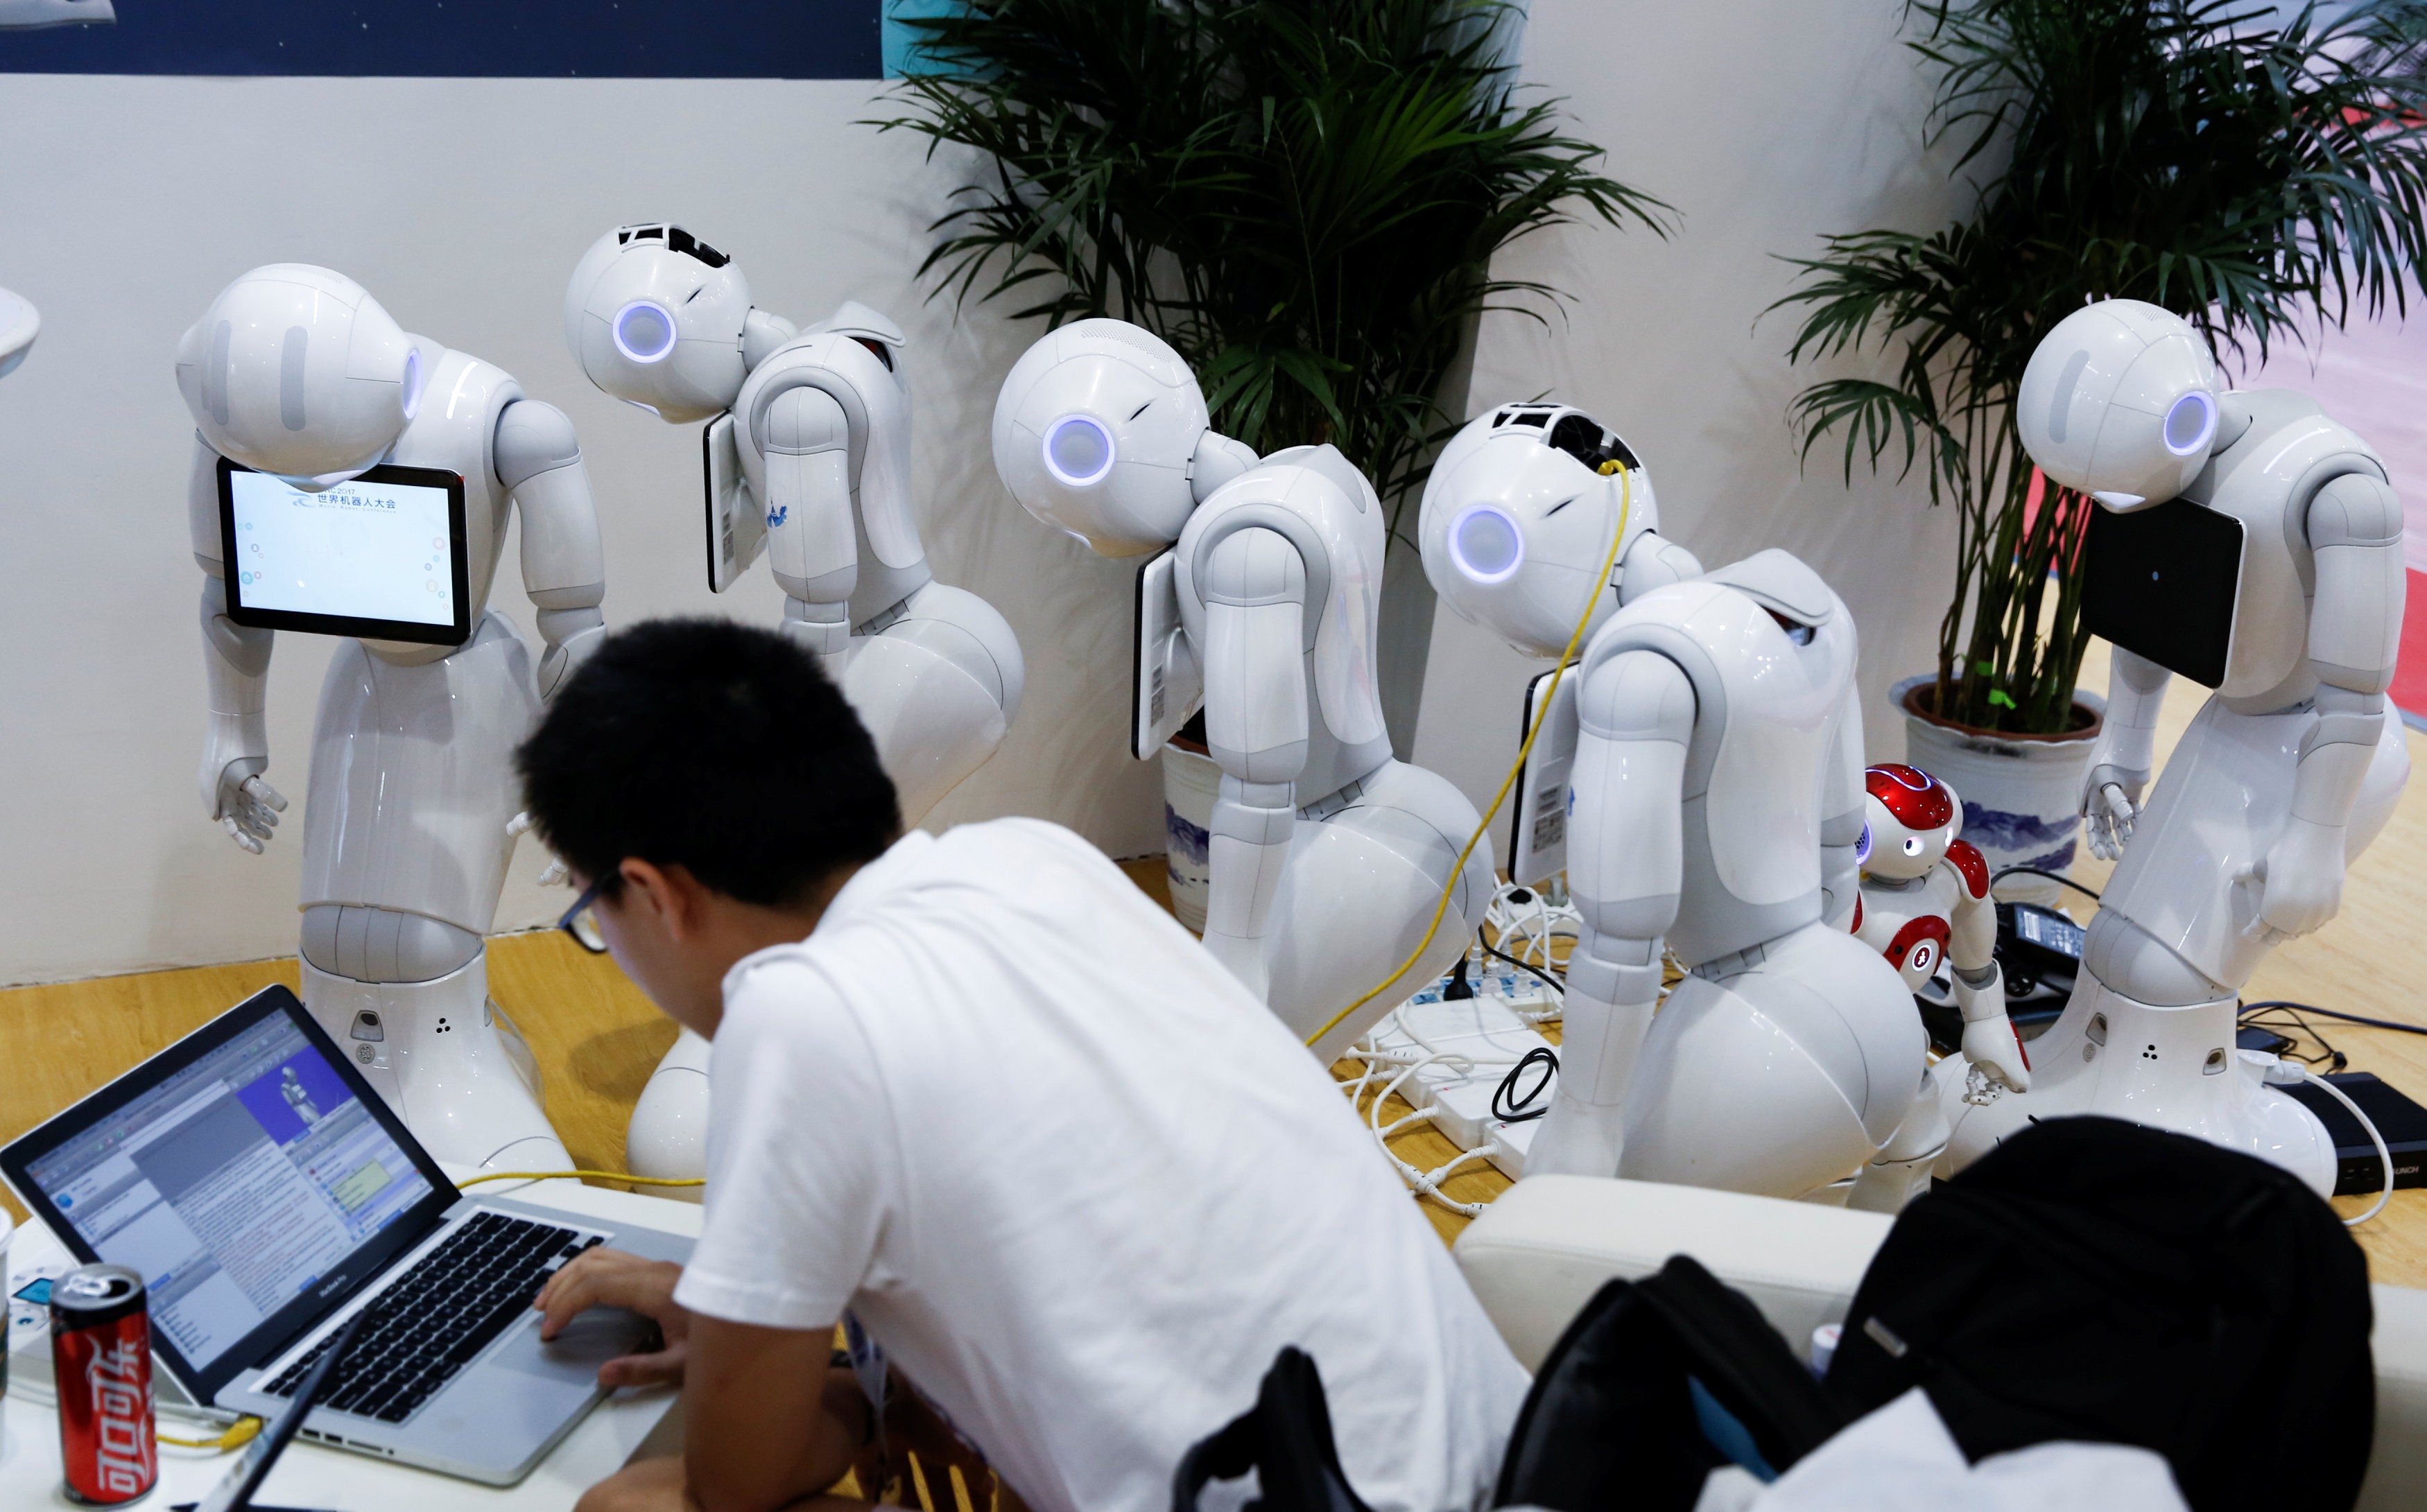 A technician prepares SoftBank Robotics ‘Pepper’, a humanoid robot, at the 2017 World Robot Conference in Beijing on August 22, 2017. Photo: Reuters